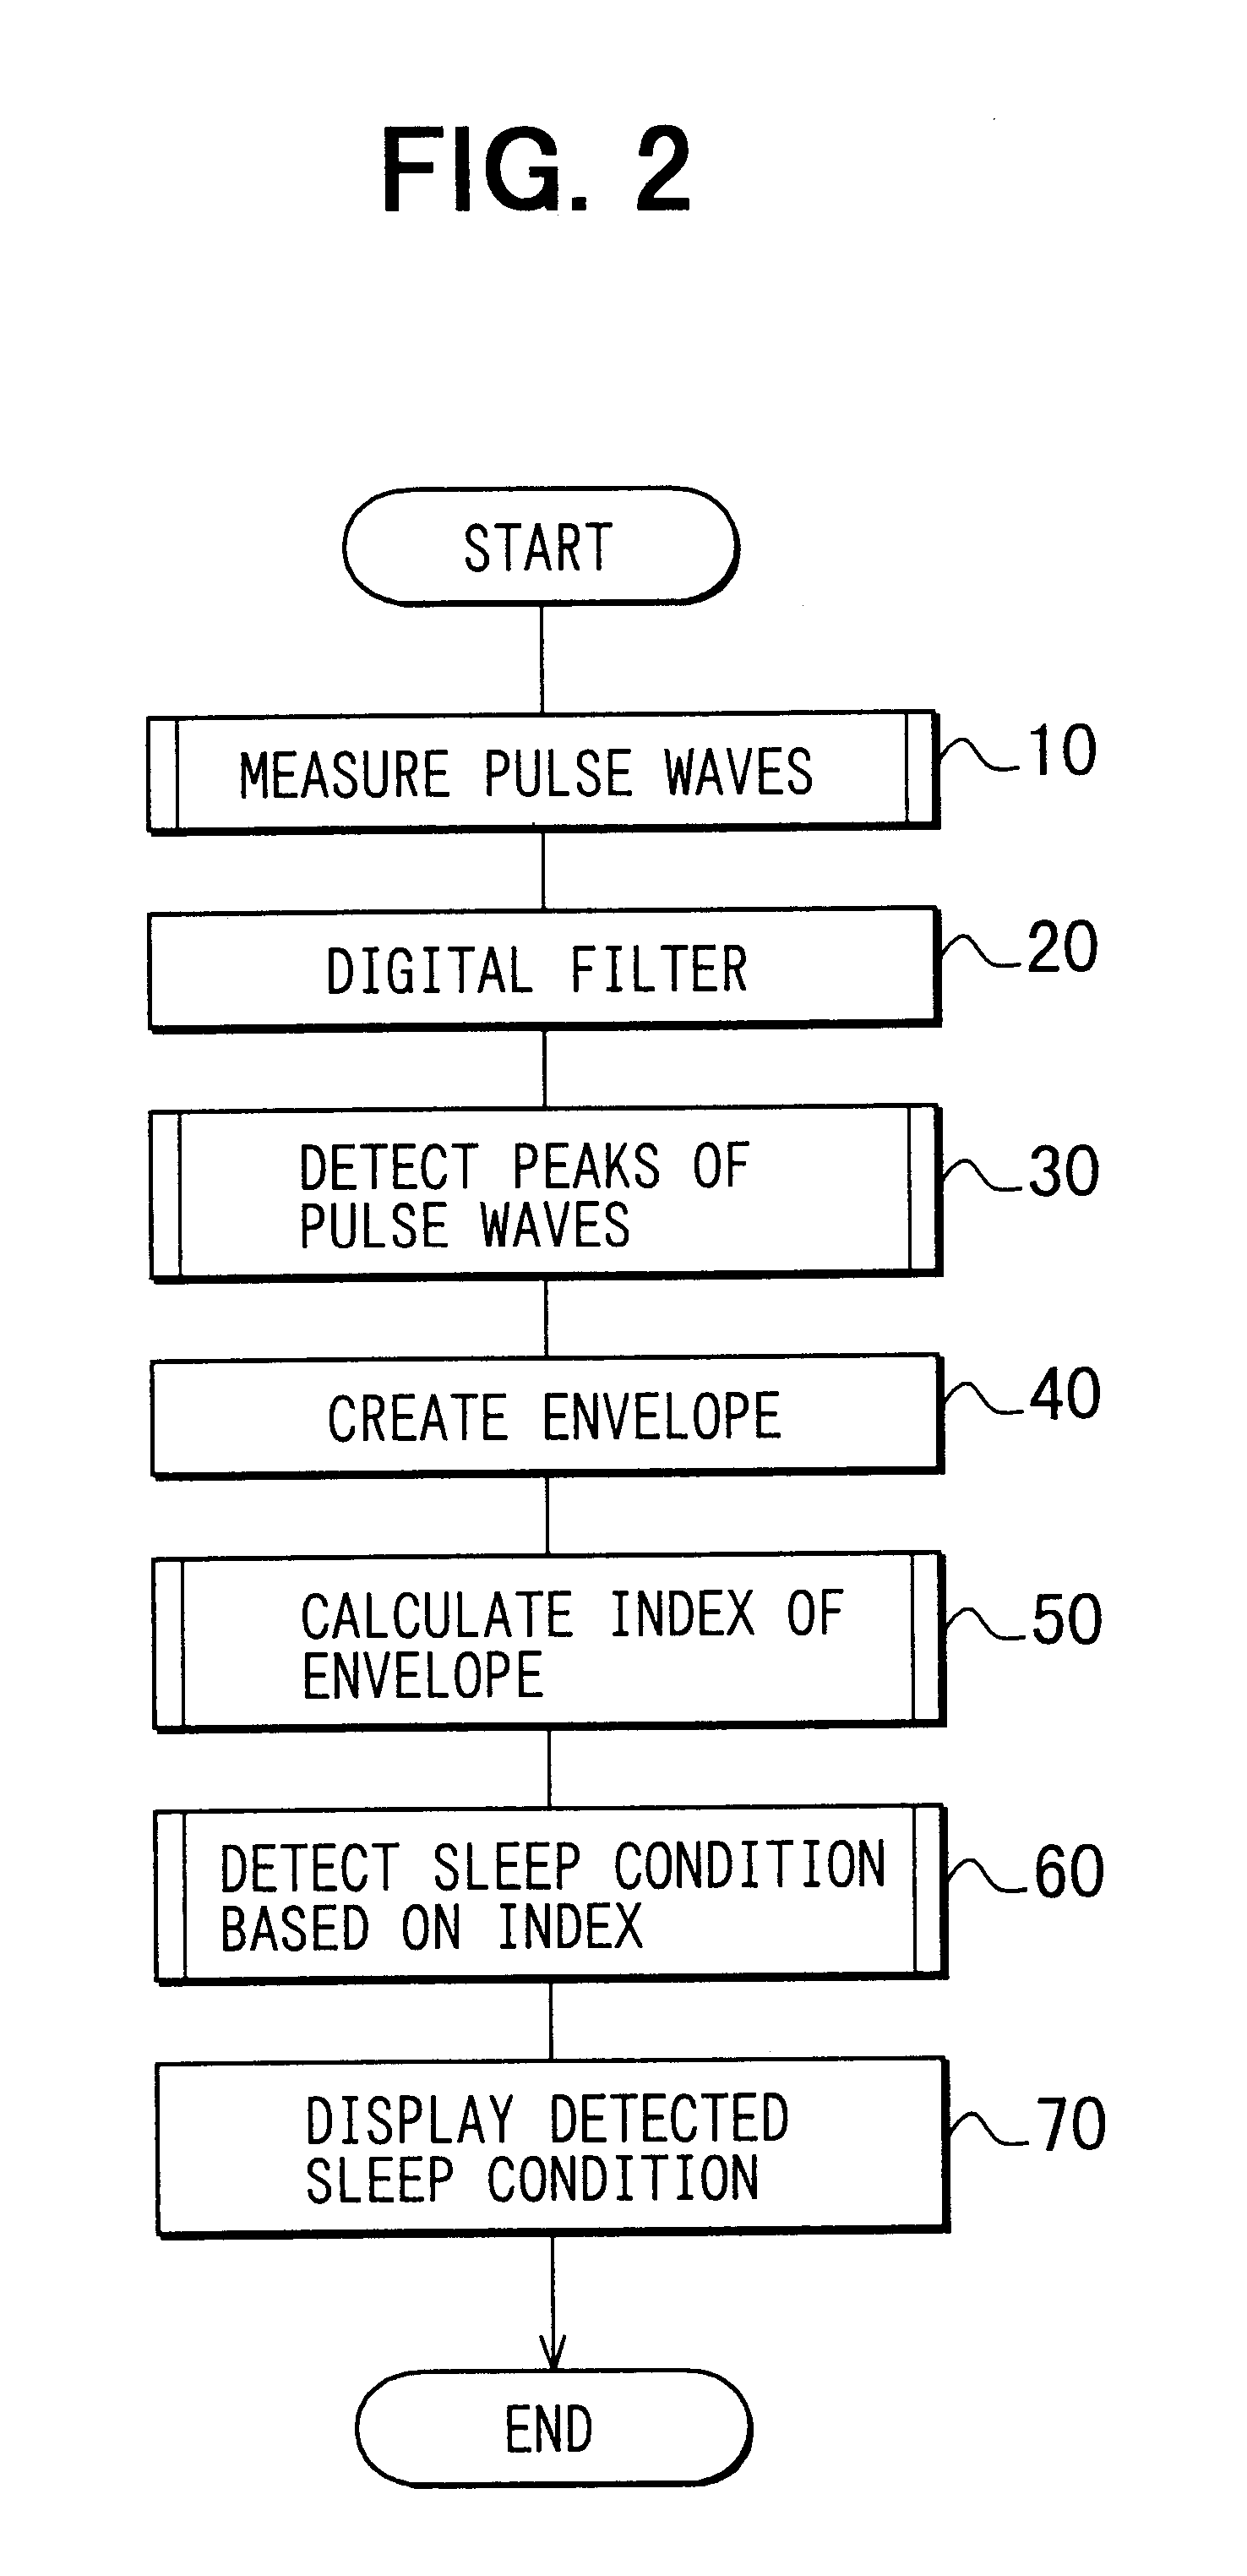 Method for detecting physiological condition of sleeping patient based on analysis of pulse waves